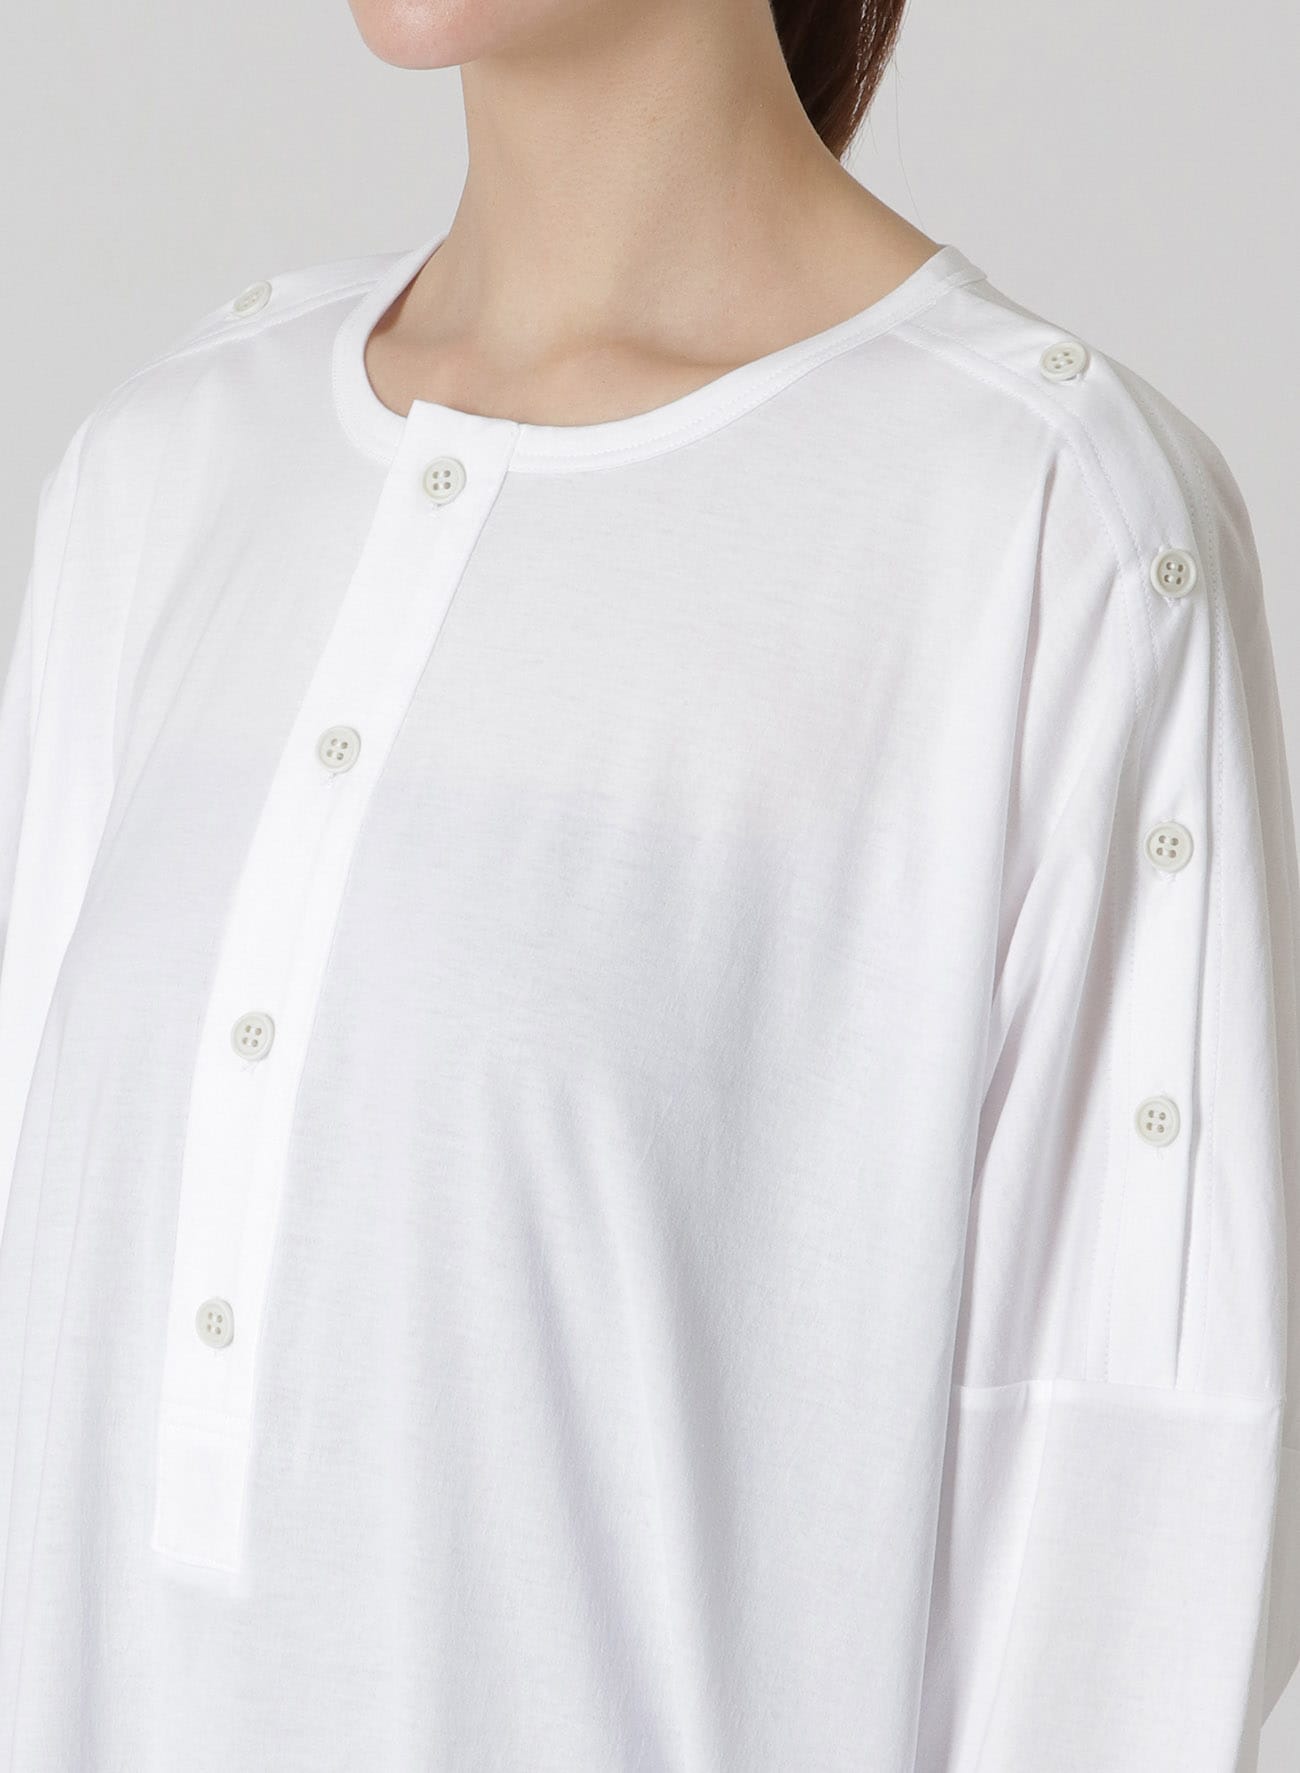 100/2 COTTON HENLEY SHIRT WITH BUTTON-UP SHOULDER SLITS